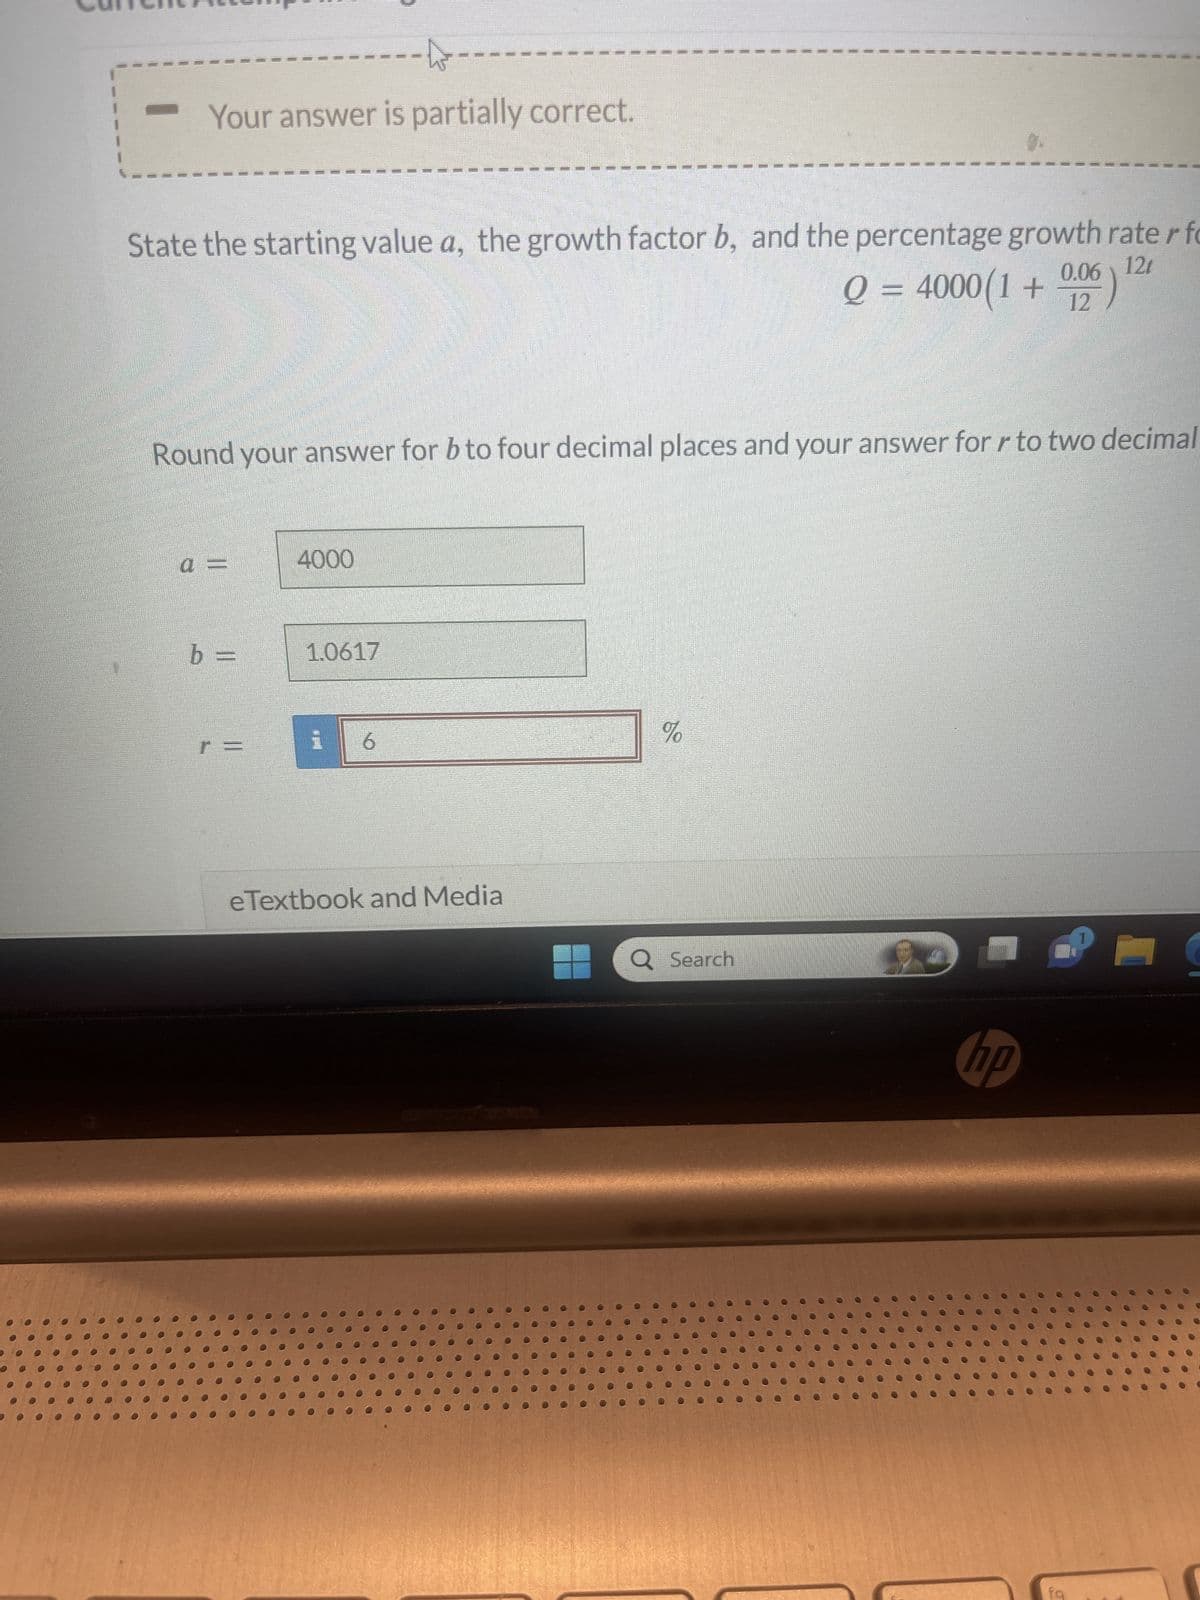 to
Your answer is partially correct.
12t
State the starting value a, the growth factor b, and the percentage growth rater fo
Q = 4000(1 + 0,06)
12
Round your answer for b to four decimal places and your answer for r to two decimal
a =
b =
4000
1.0617
6
eTextbook and Media
%
Q Search
hp
fq